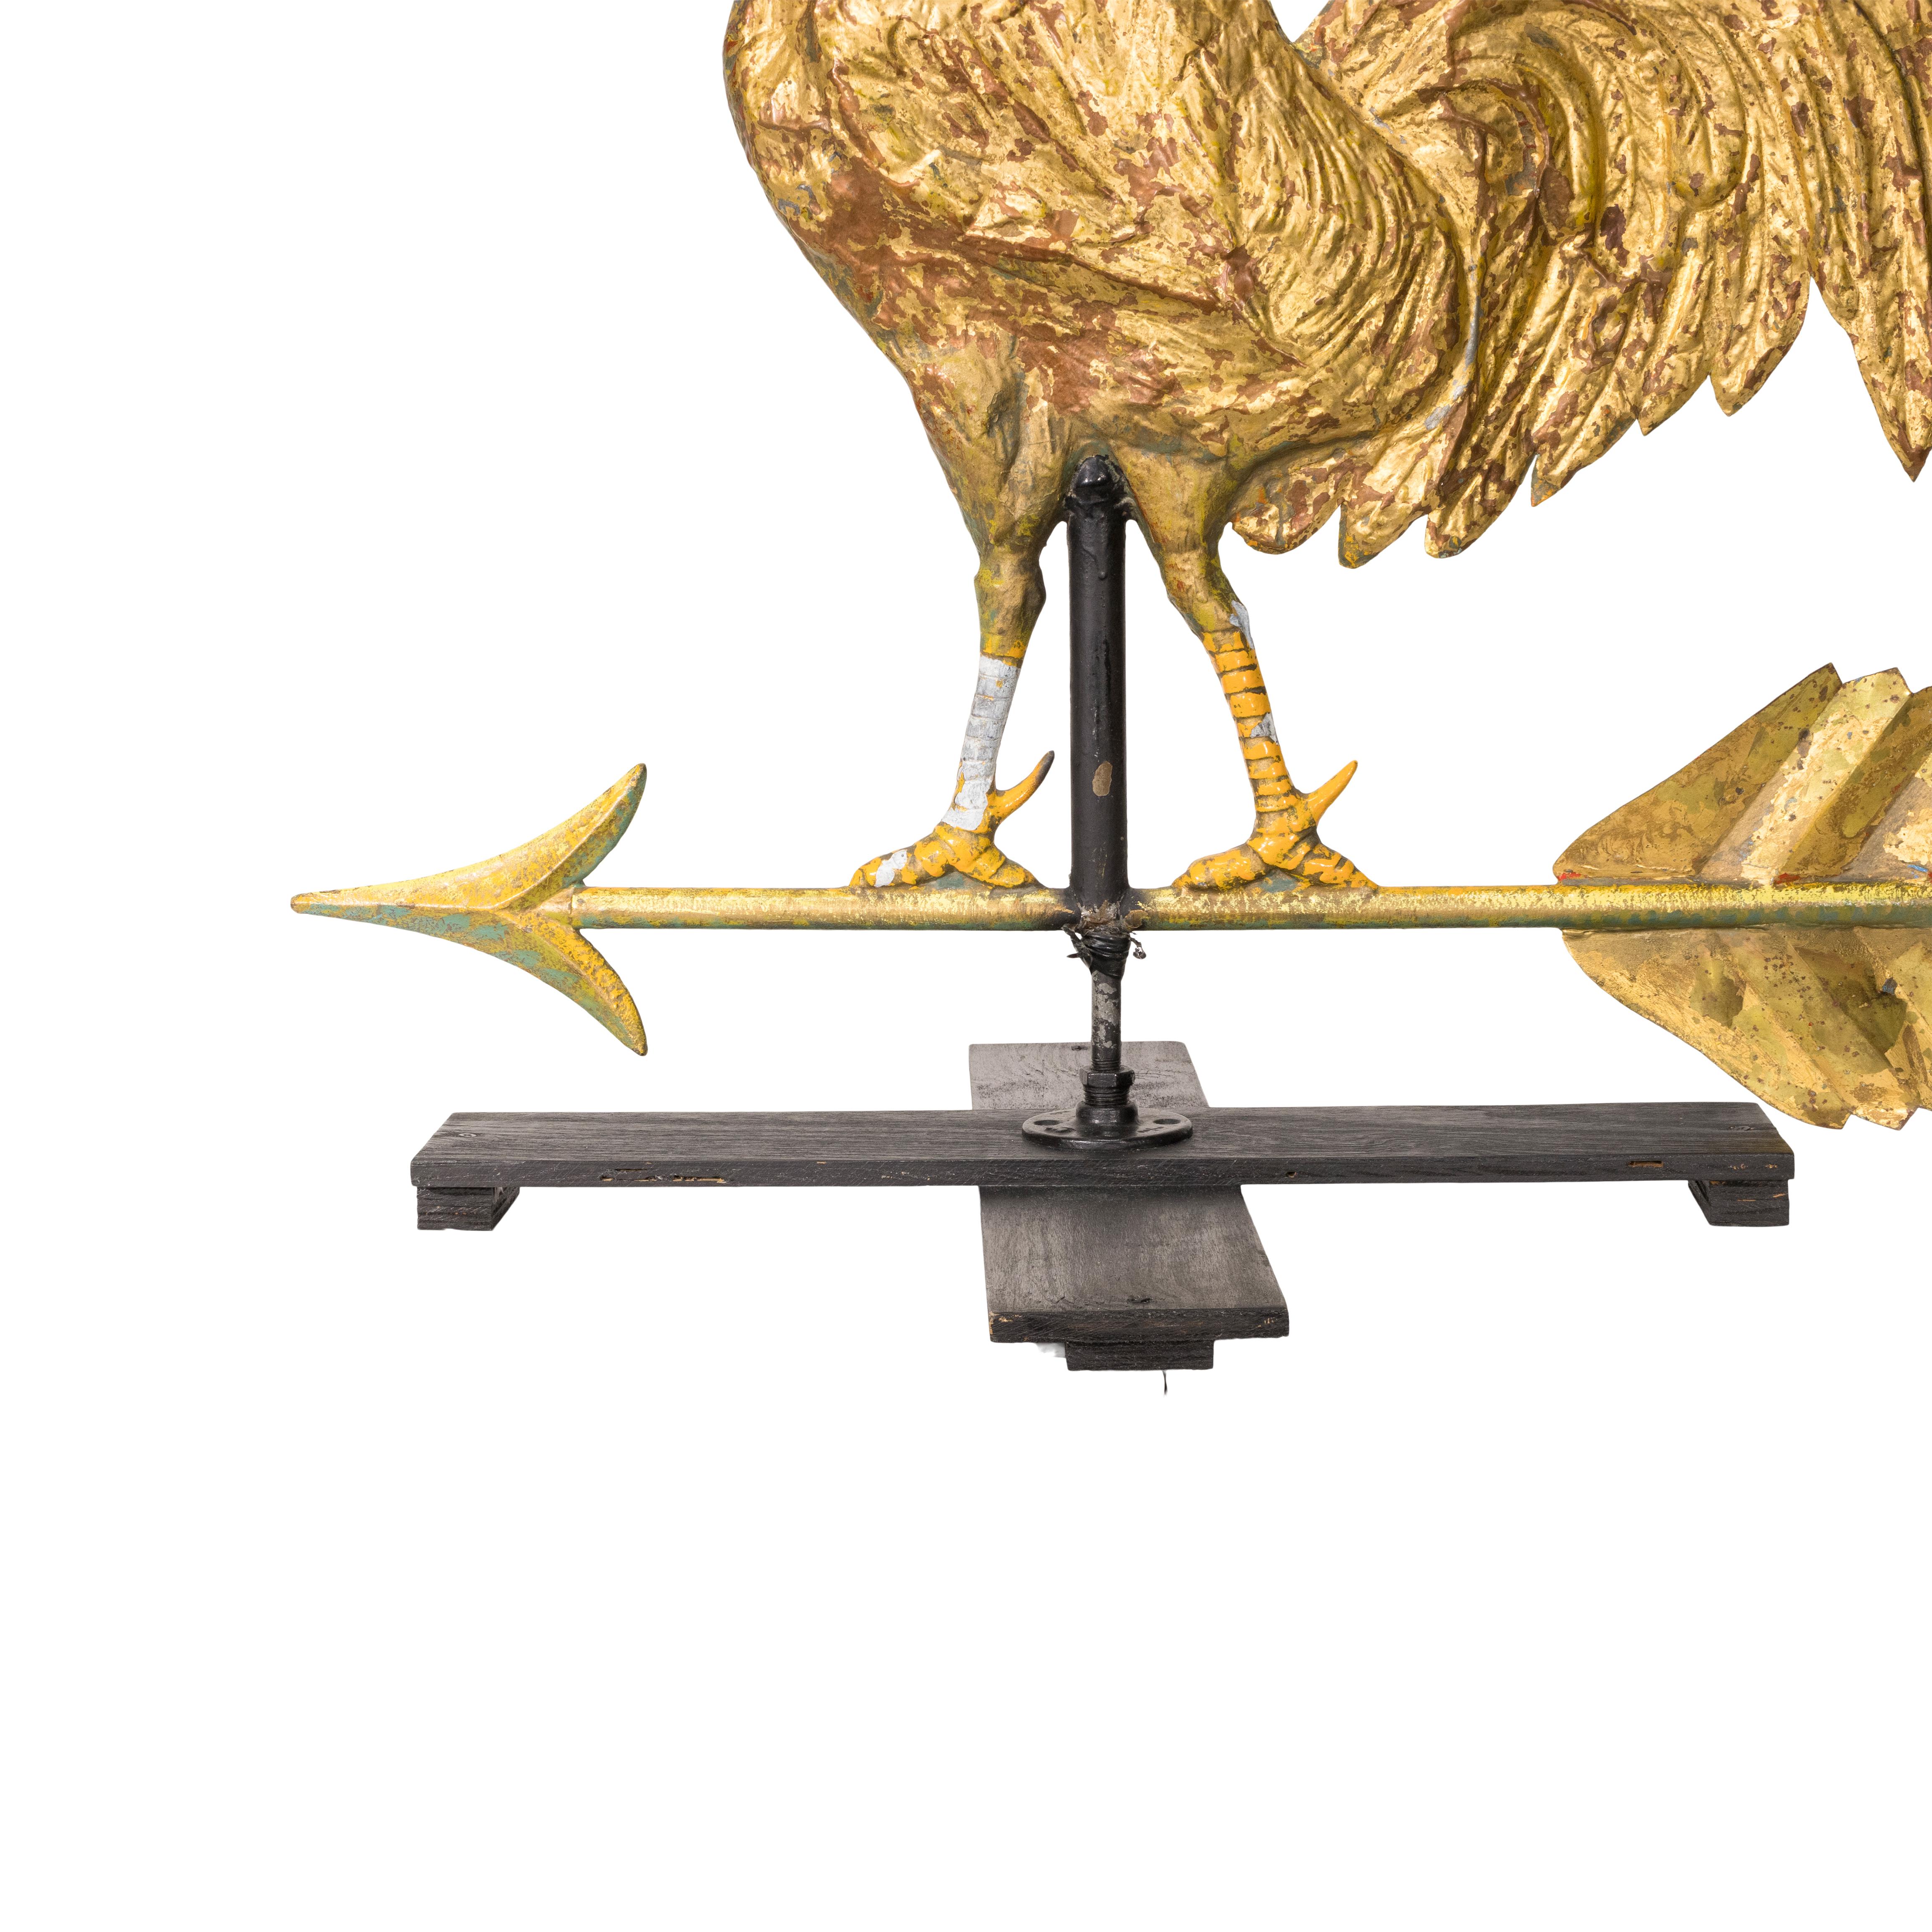 Three dimensional copper rooster weather vane on directional arrow. Mounted on base. Multiple coats of paint with gold gilding. Larger than most.

Period: 19th century
Origin: Ohio, US
Size: 34